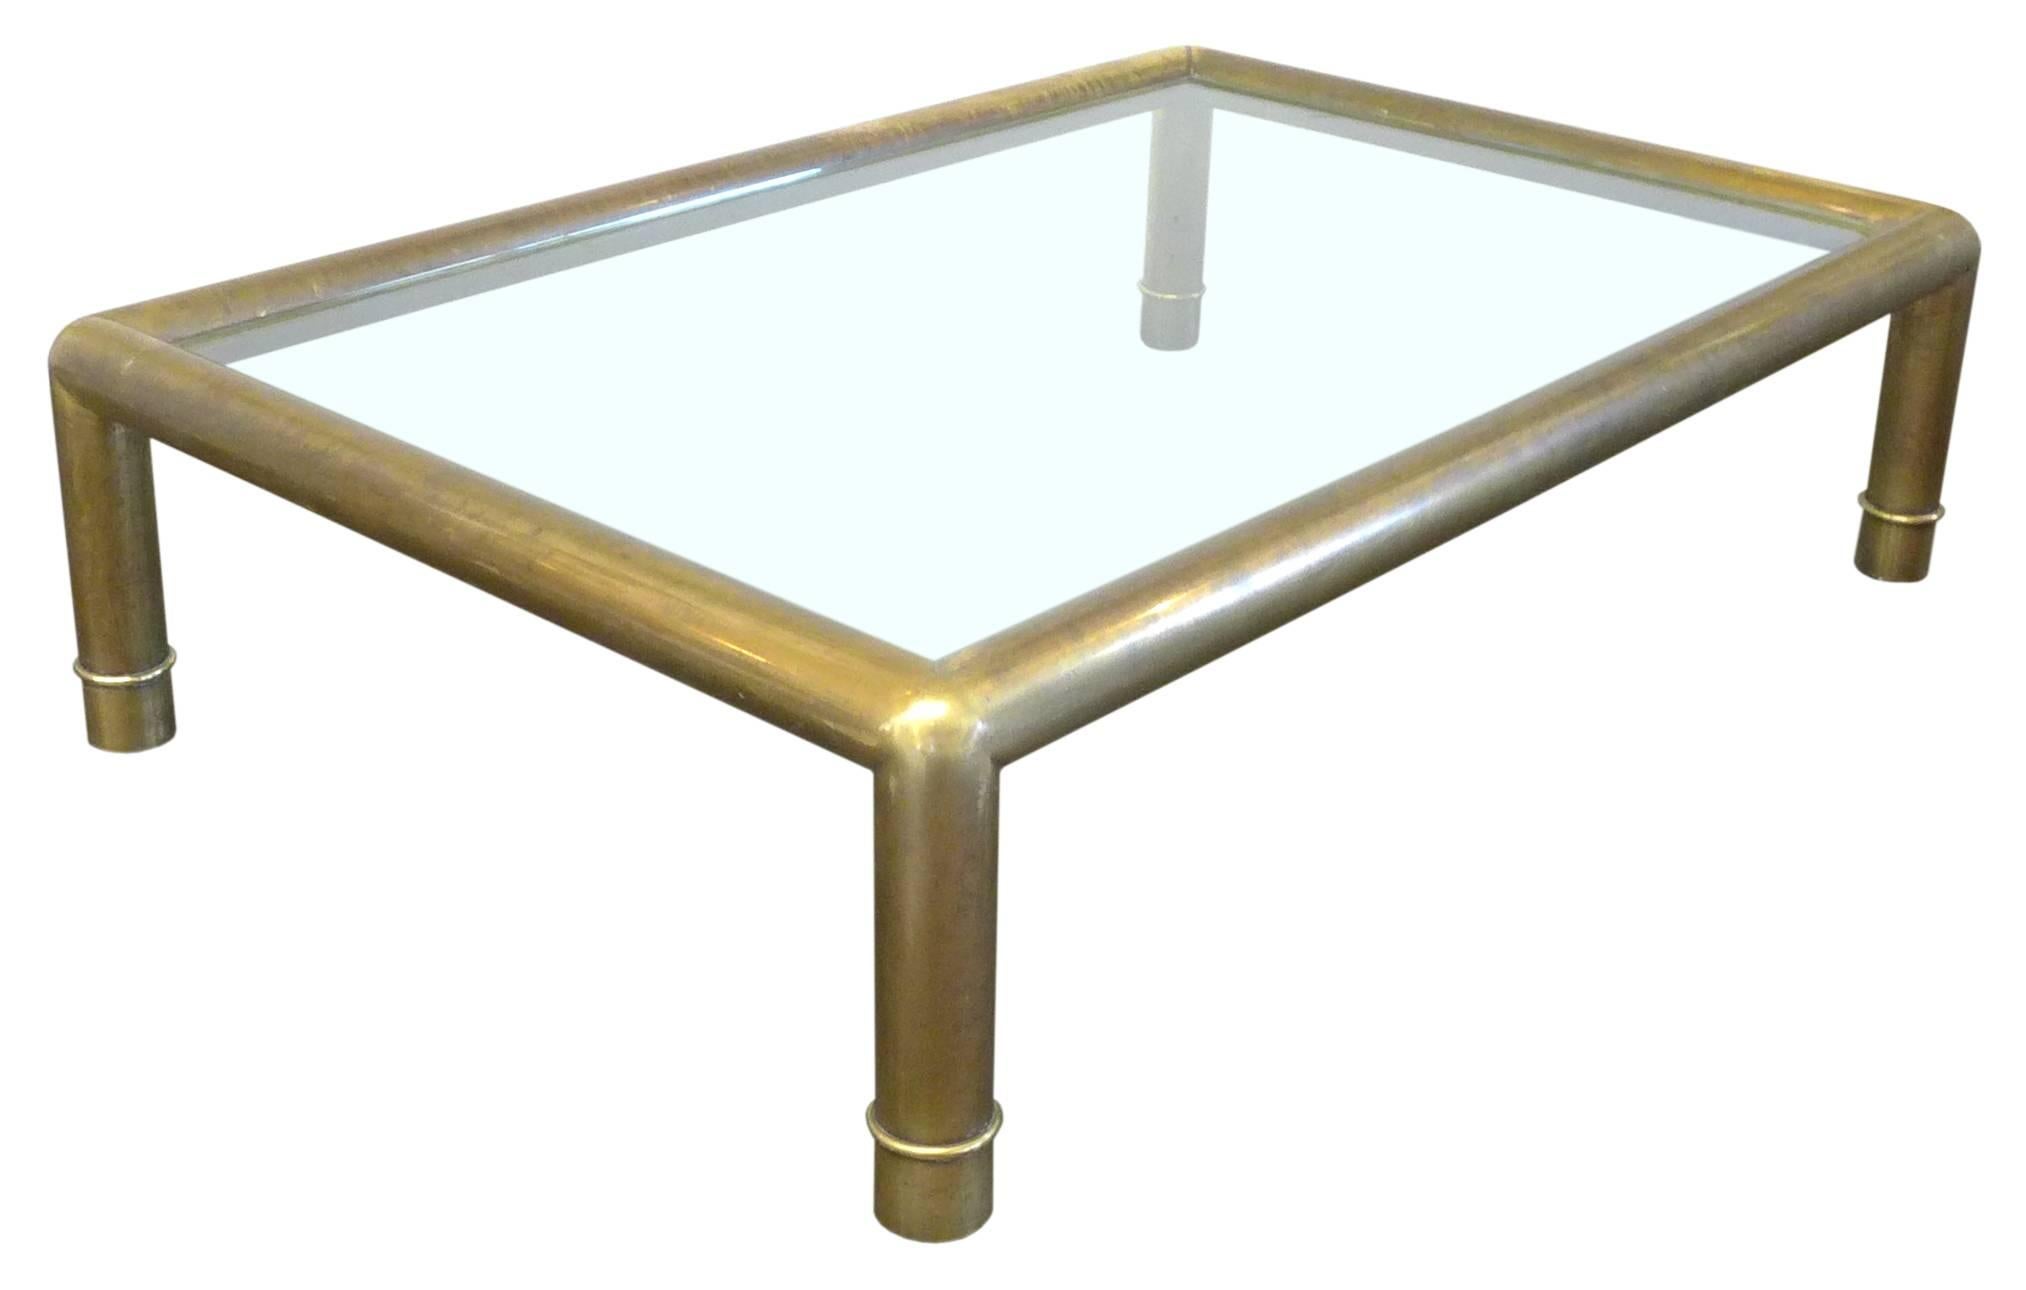 A wonderful, large, rectangular brass and glass coffee table by Mastercraft. A simple, elegant frame of thick-gauge tubular brass with subtle ring-detail at each leg. Great impressive scale and much desired patina throughout. An outstanding example